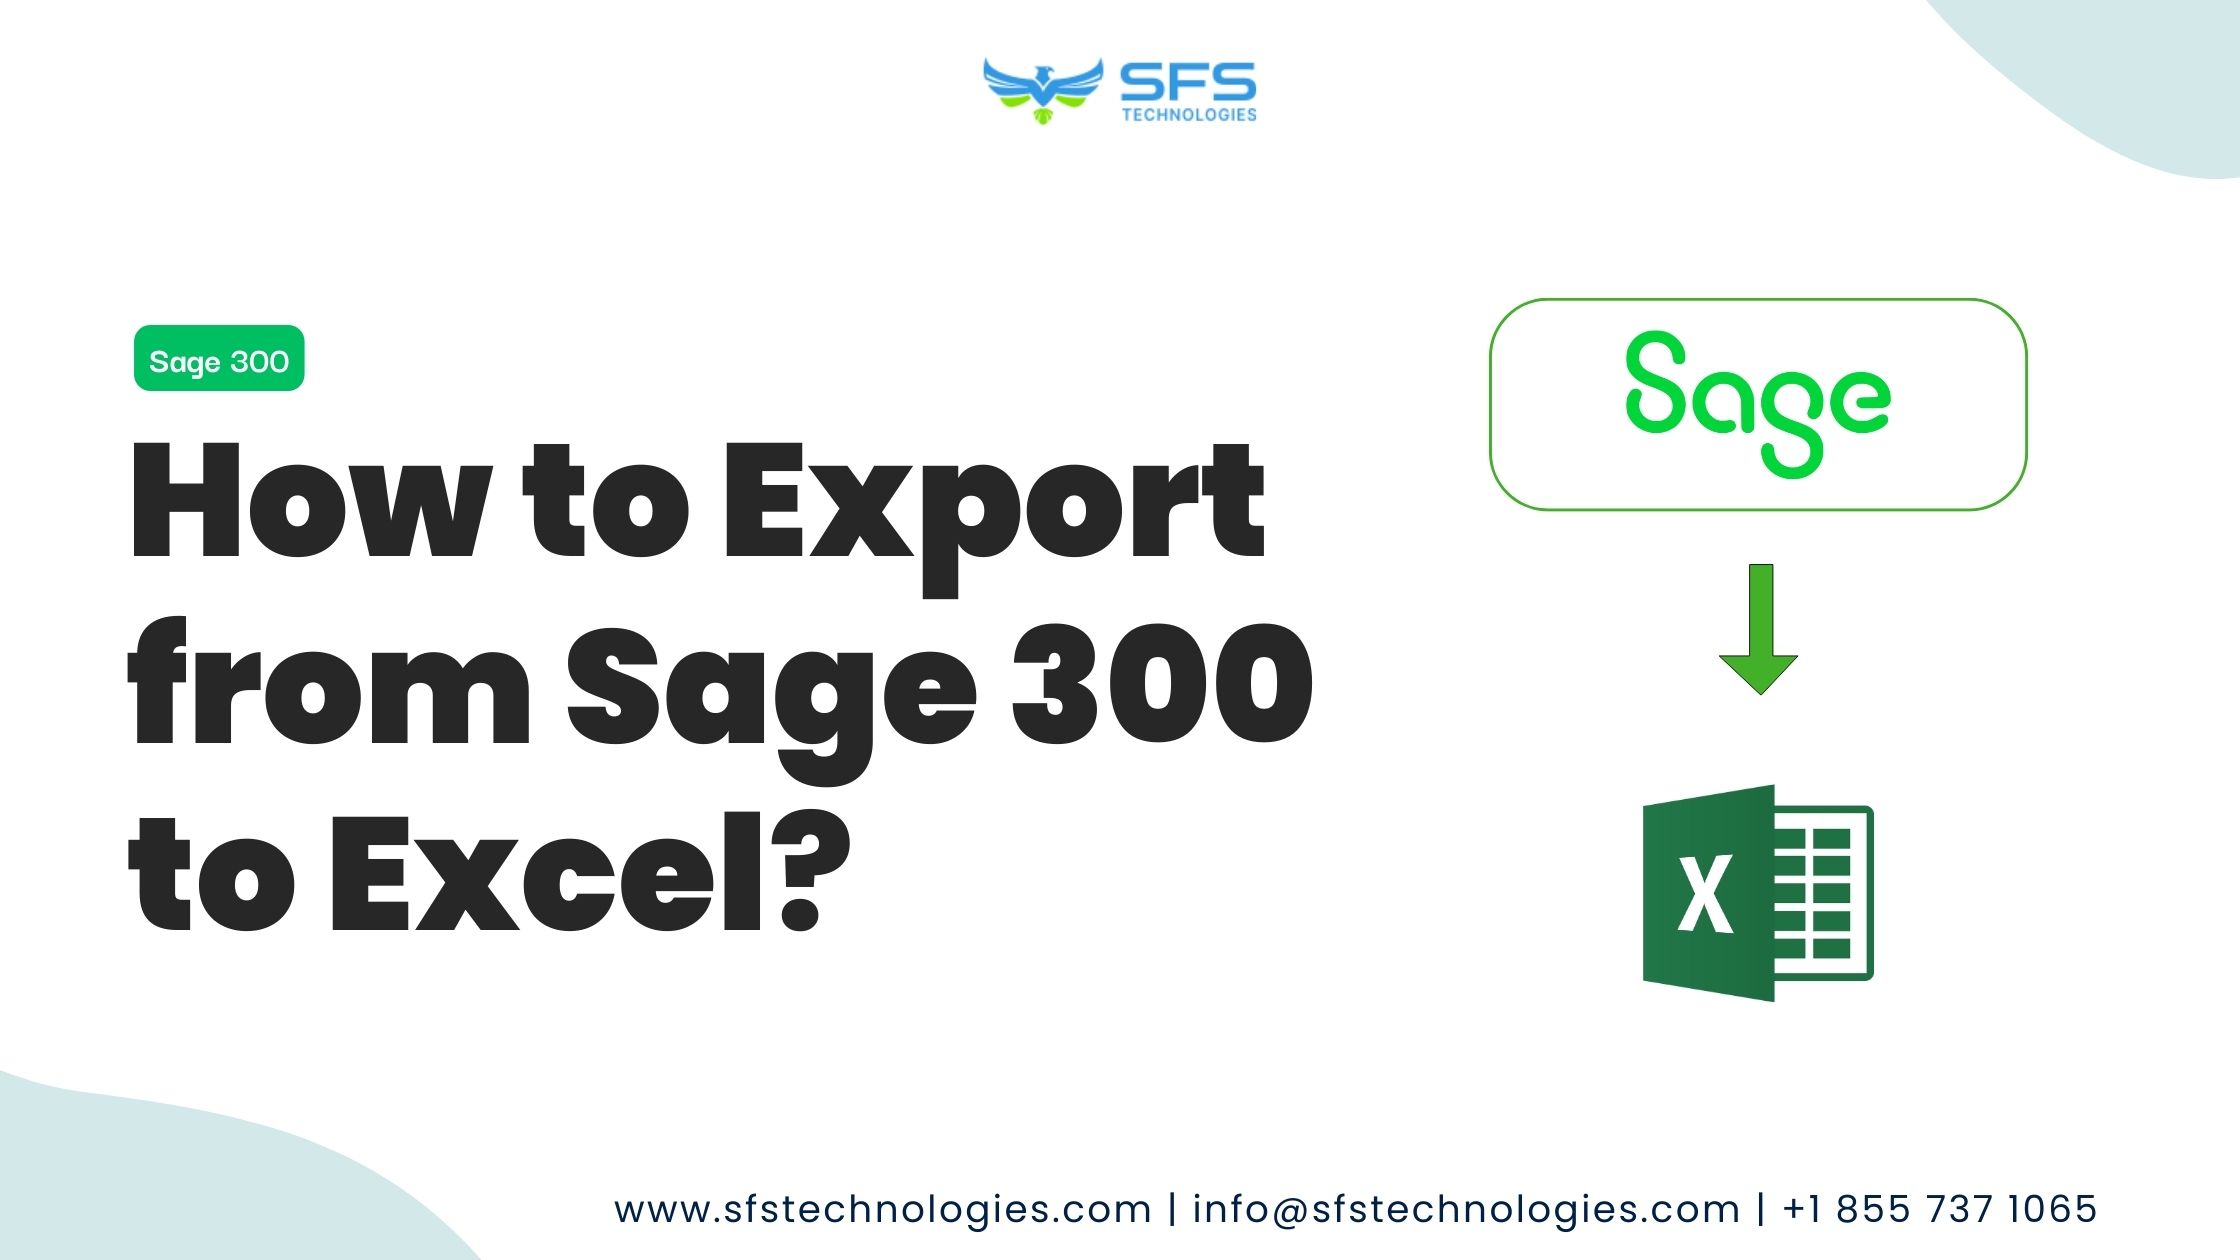 How to Export from Sage 300 to Excel